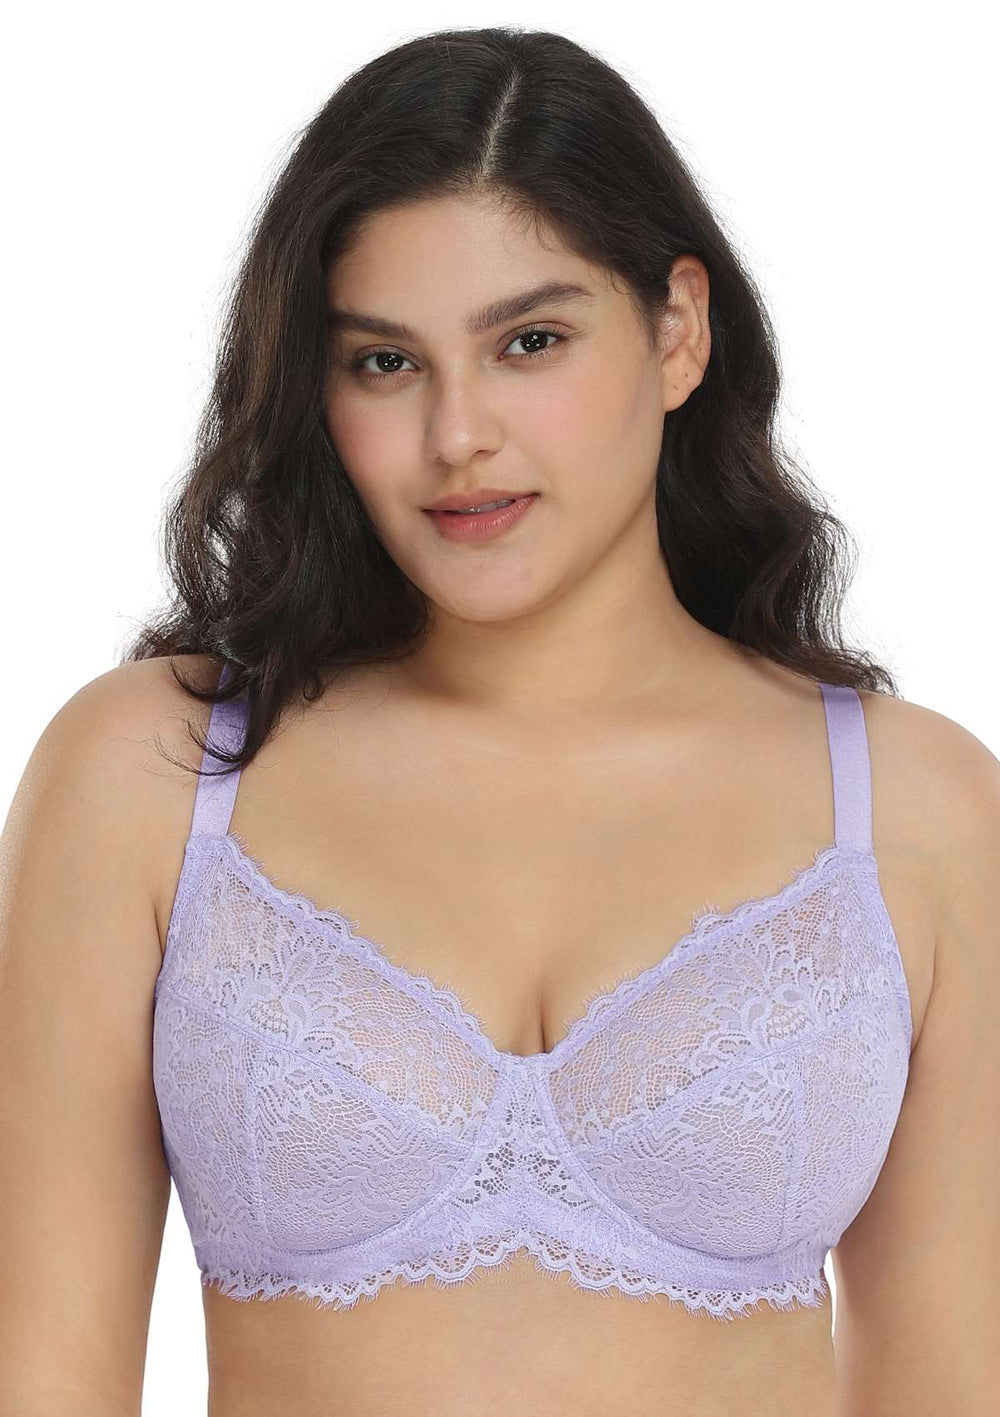 Bestsellers  Finest HSIA Bras Selected by Our Customers